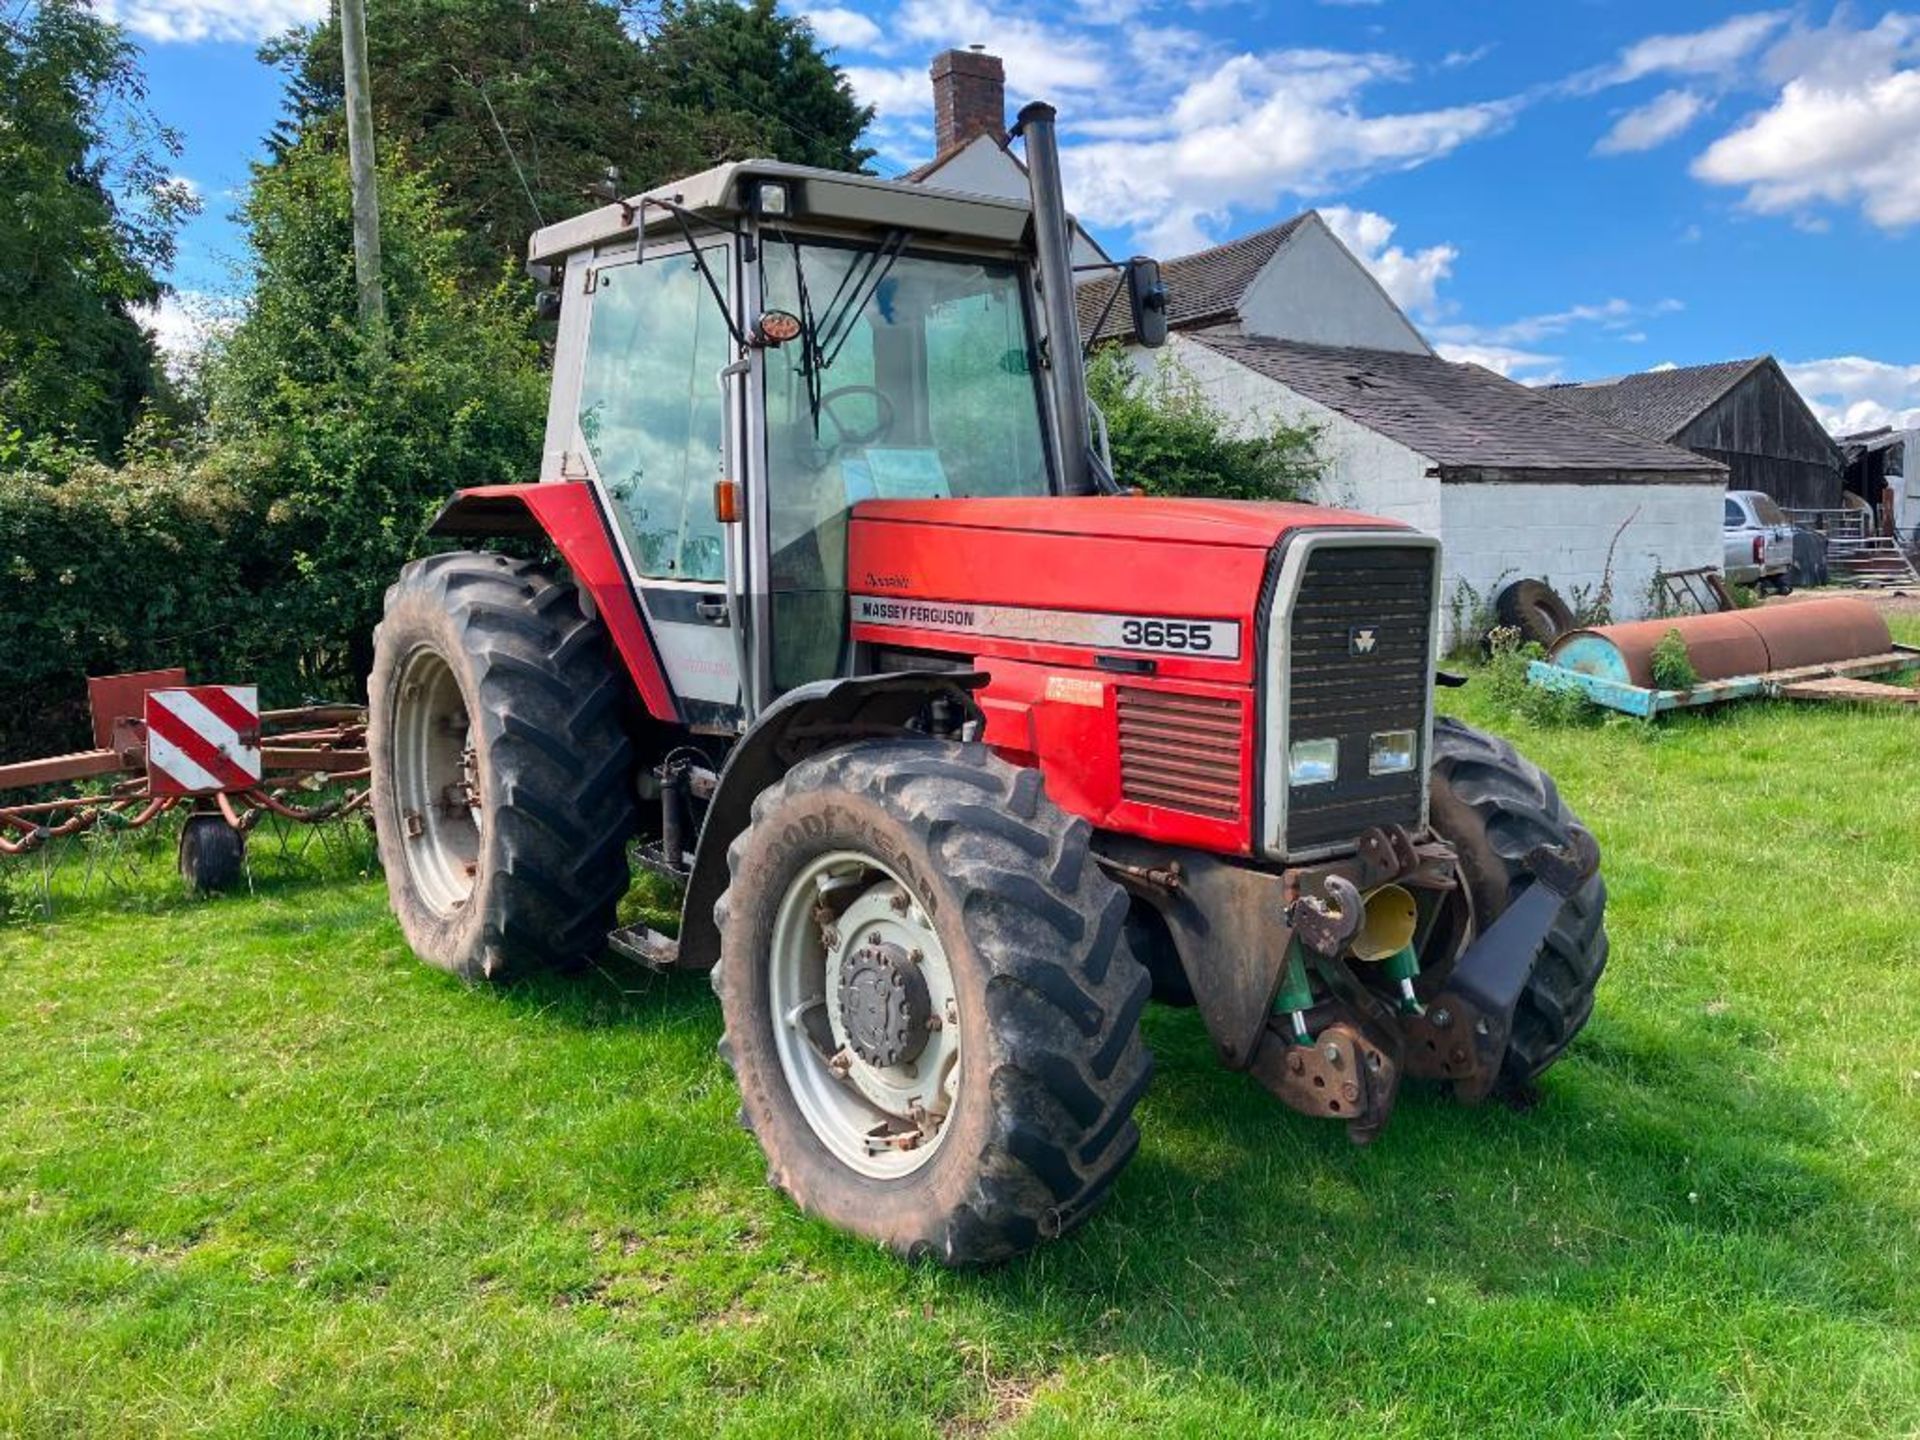 1995 Massey Ferguson 3655 Dynashift 4wd Datatronic tractor with 3 manual spools, front linkage and P - Image 9 of 23